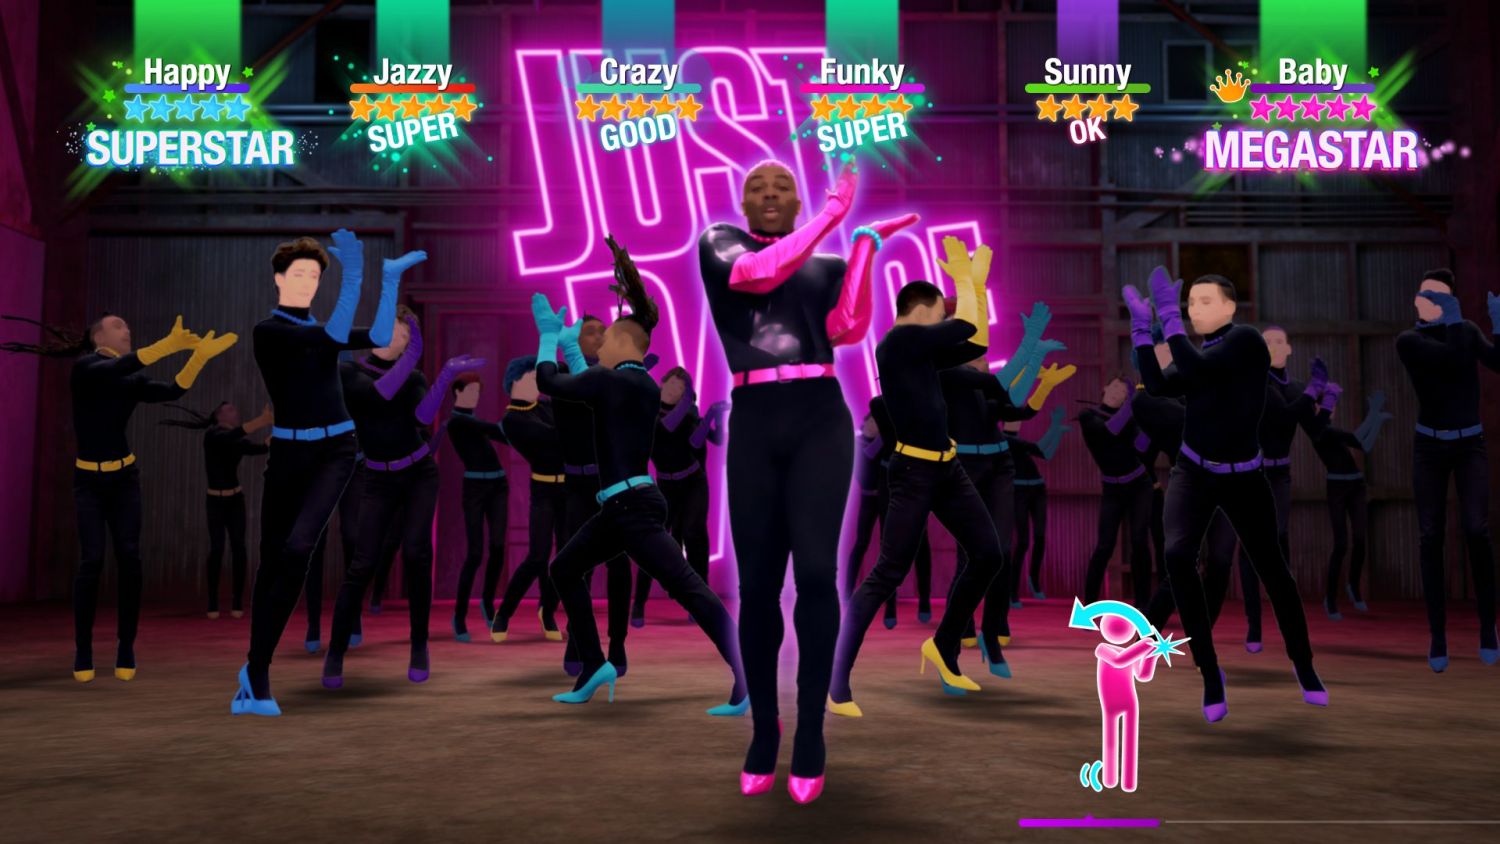 Geek Review: Just Dance 2022 - Fit for a party